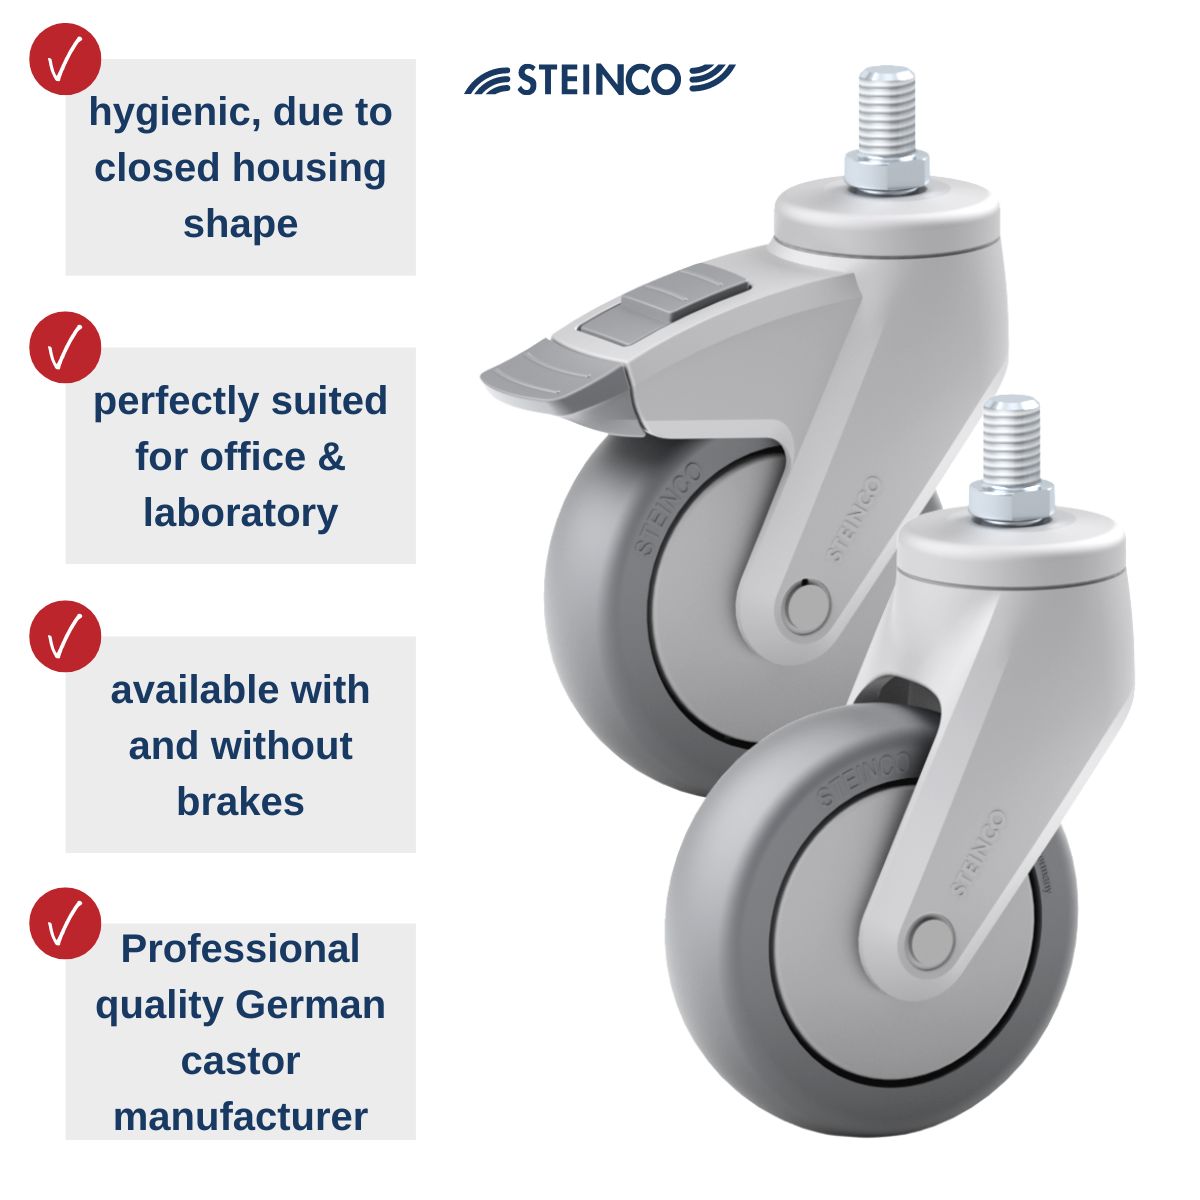 Steinco single castors made of plastic, with and without brake - perfect for laboratory & office - professional apparatus castors from german manufacturer - castors for conference room furniture & tables